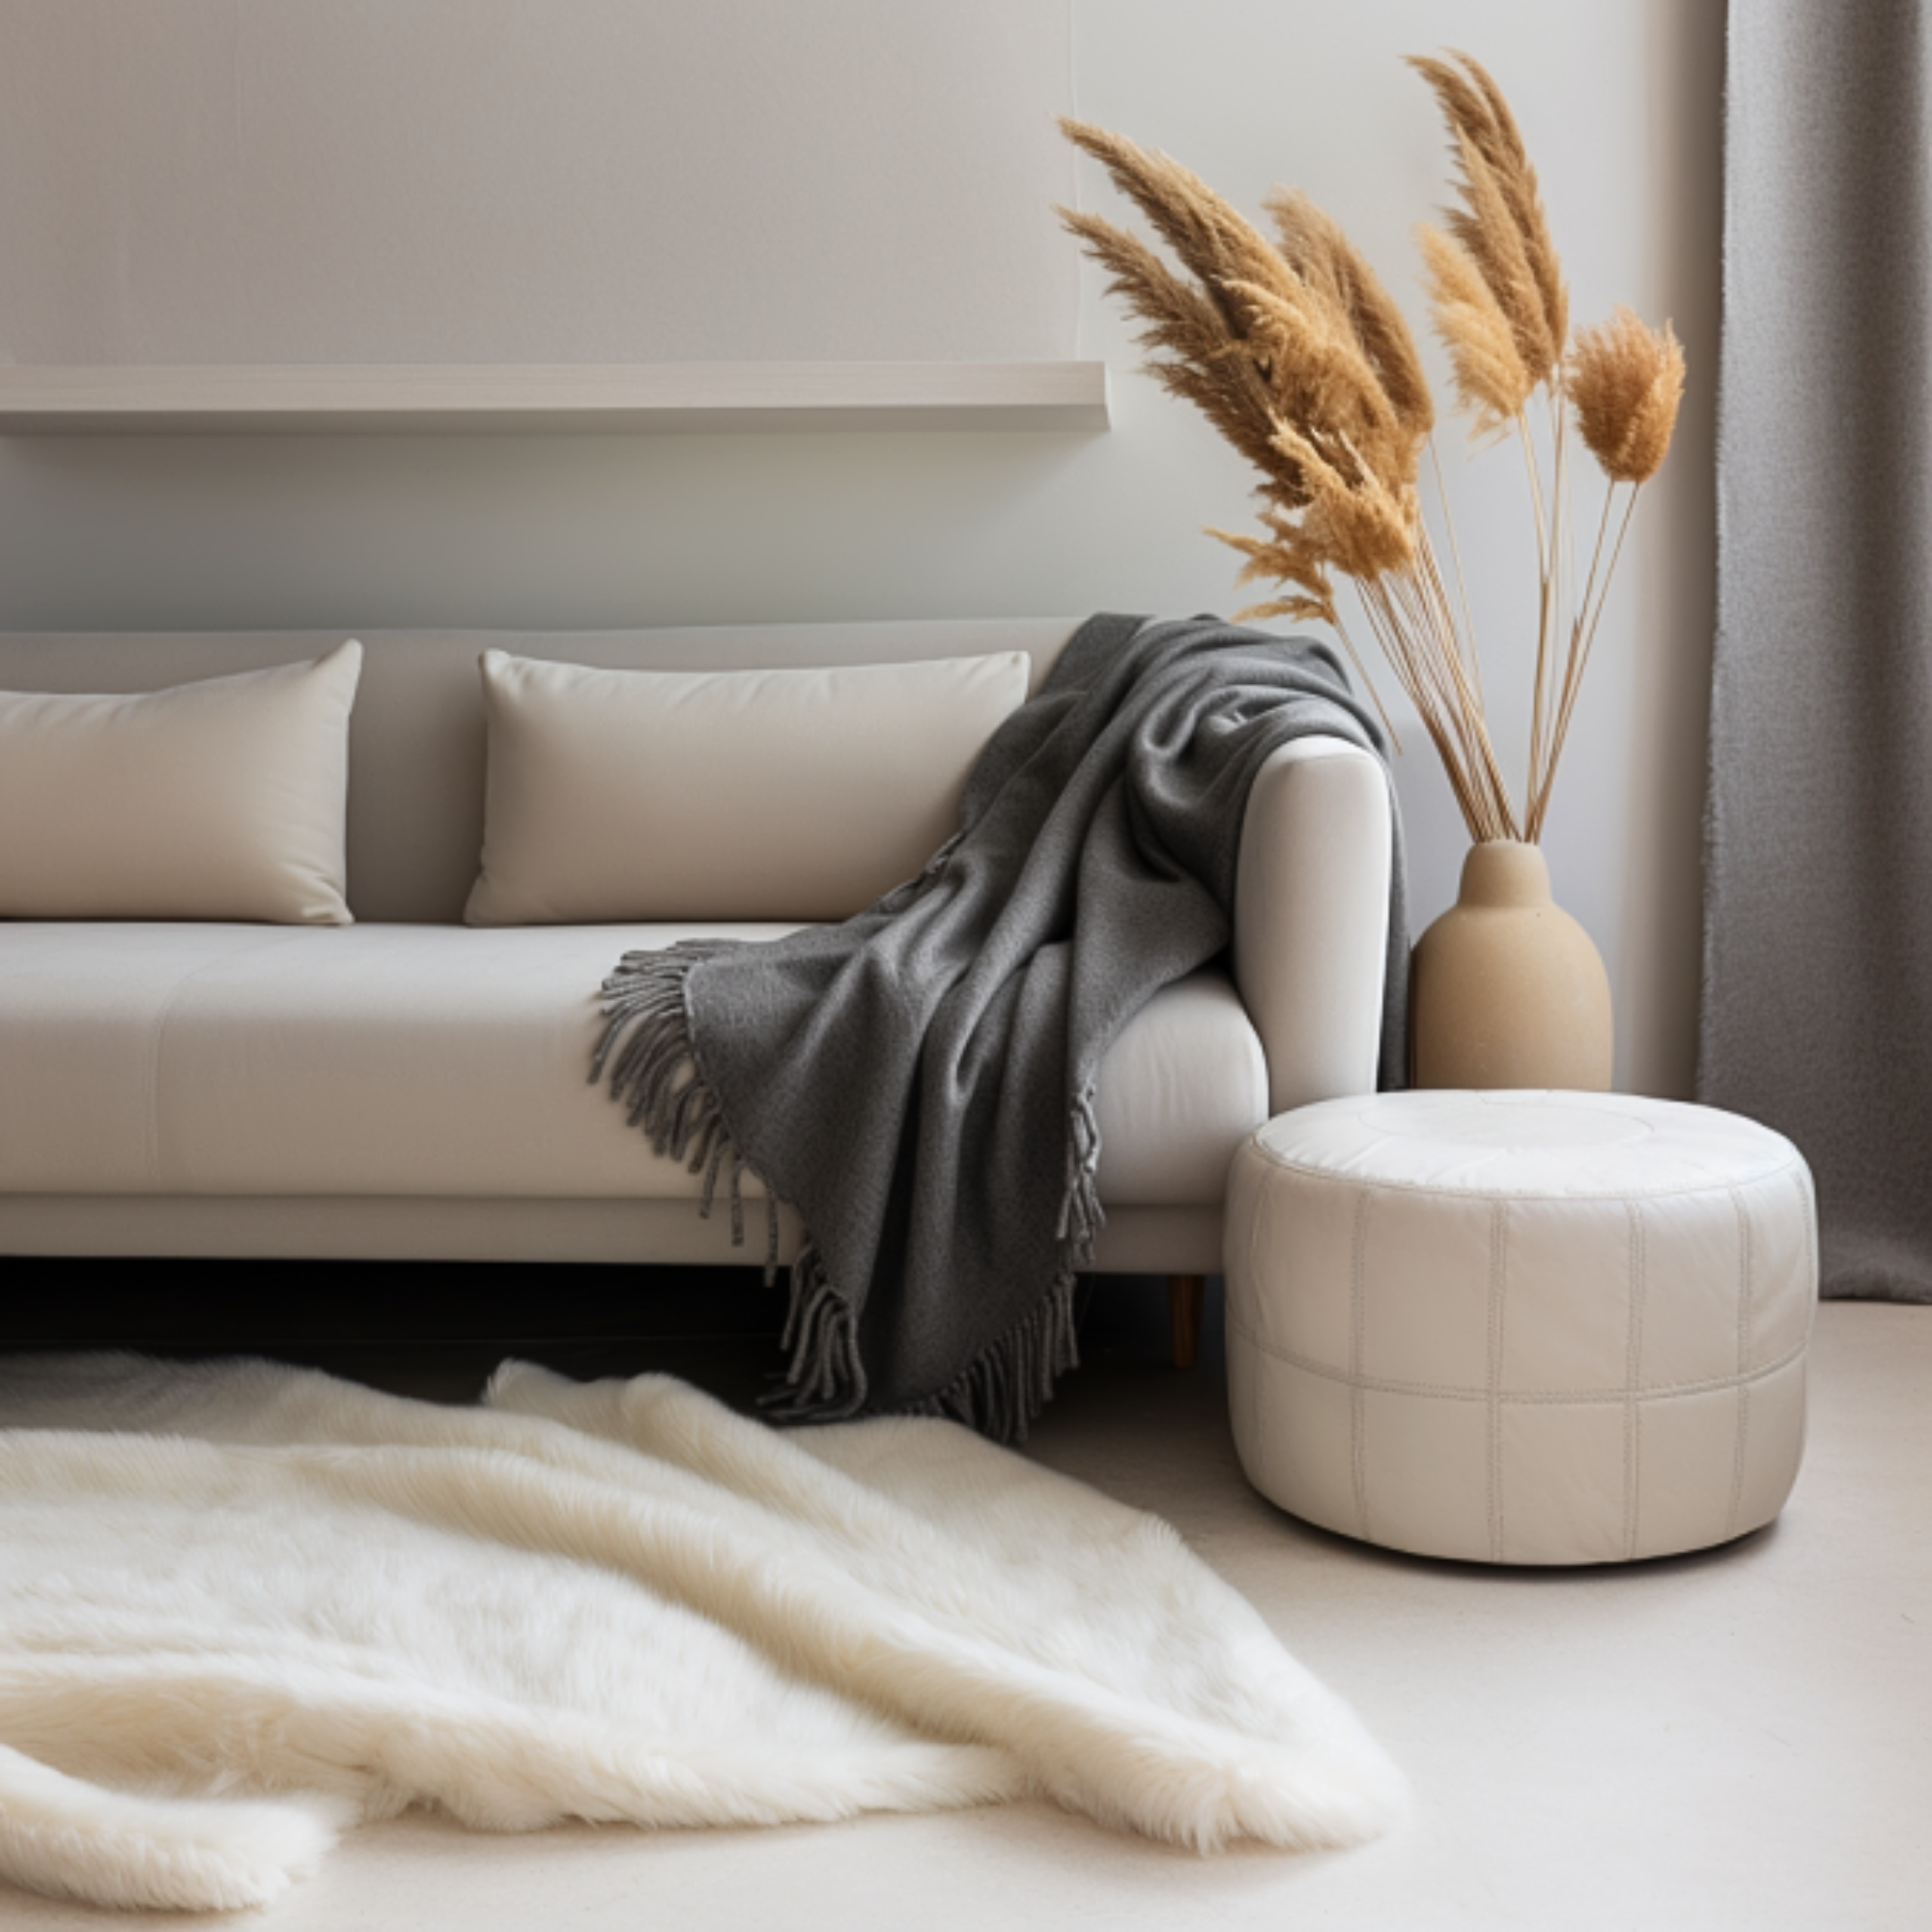 100% Merino Wool Blankets, Warmth and Style for Your Home